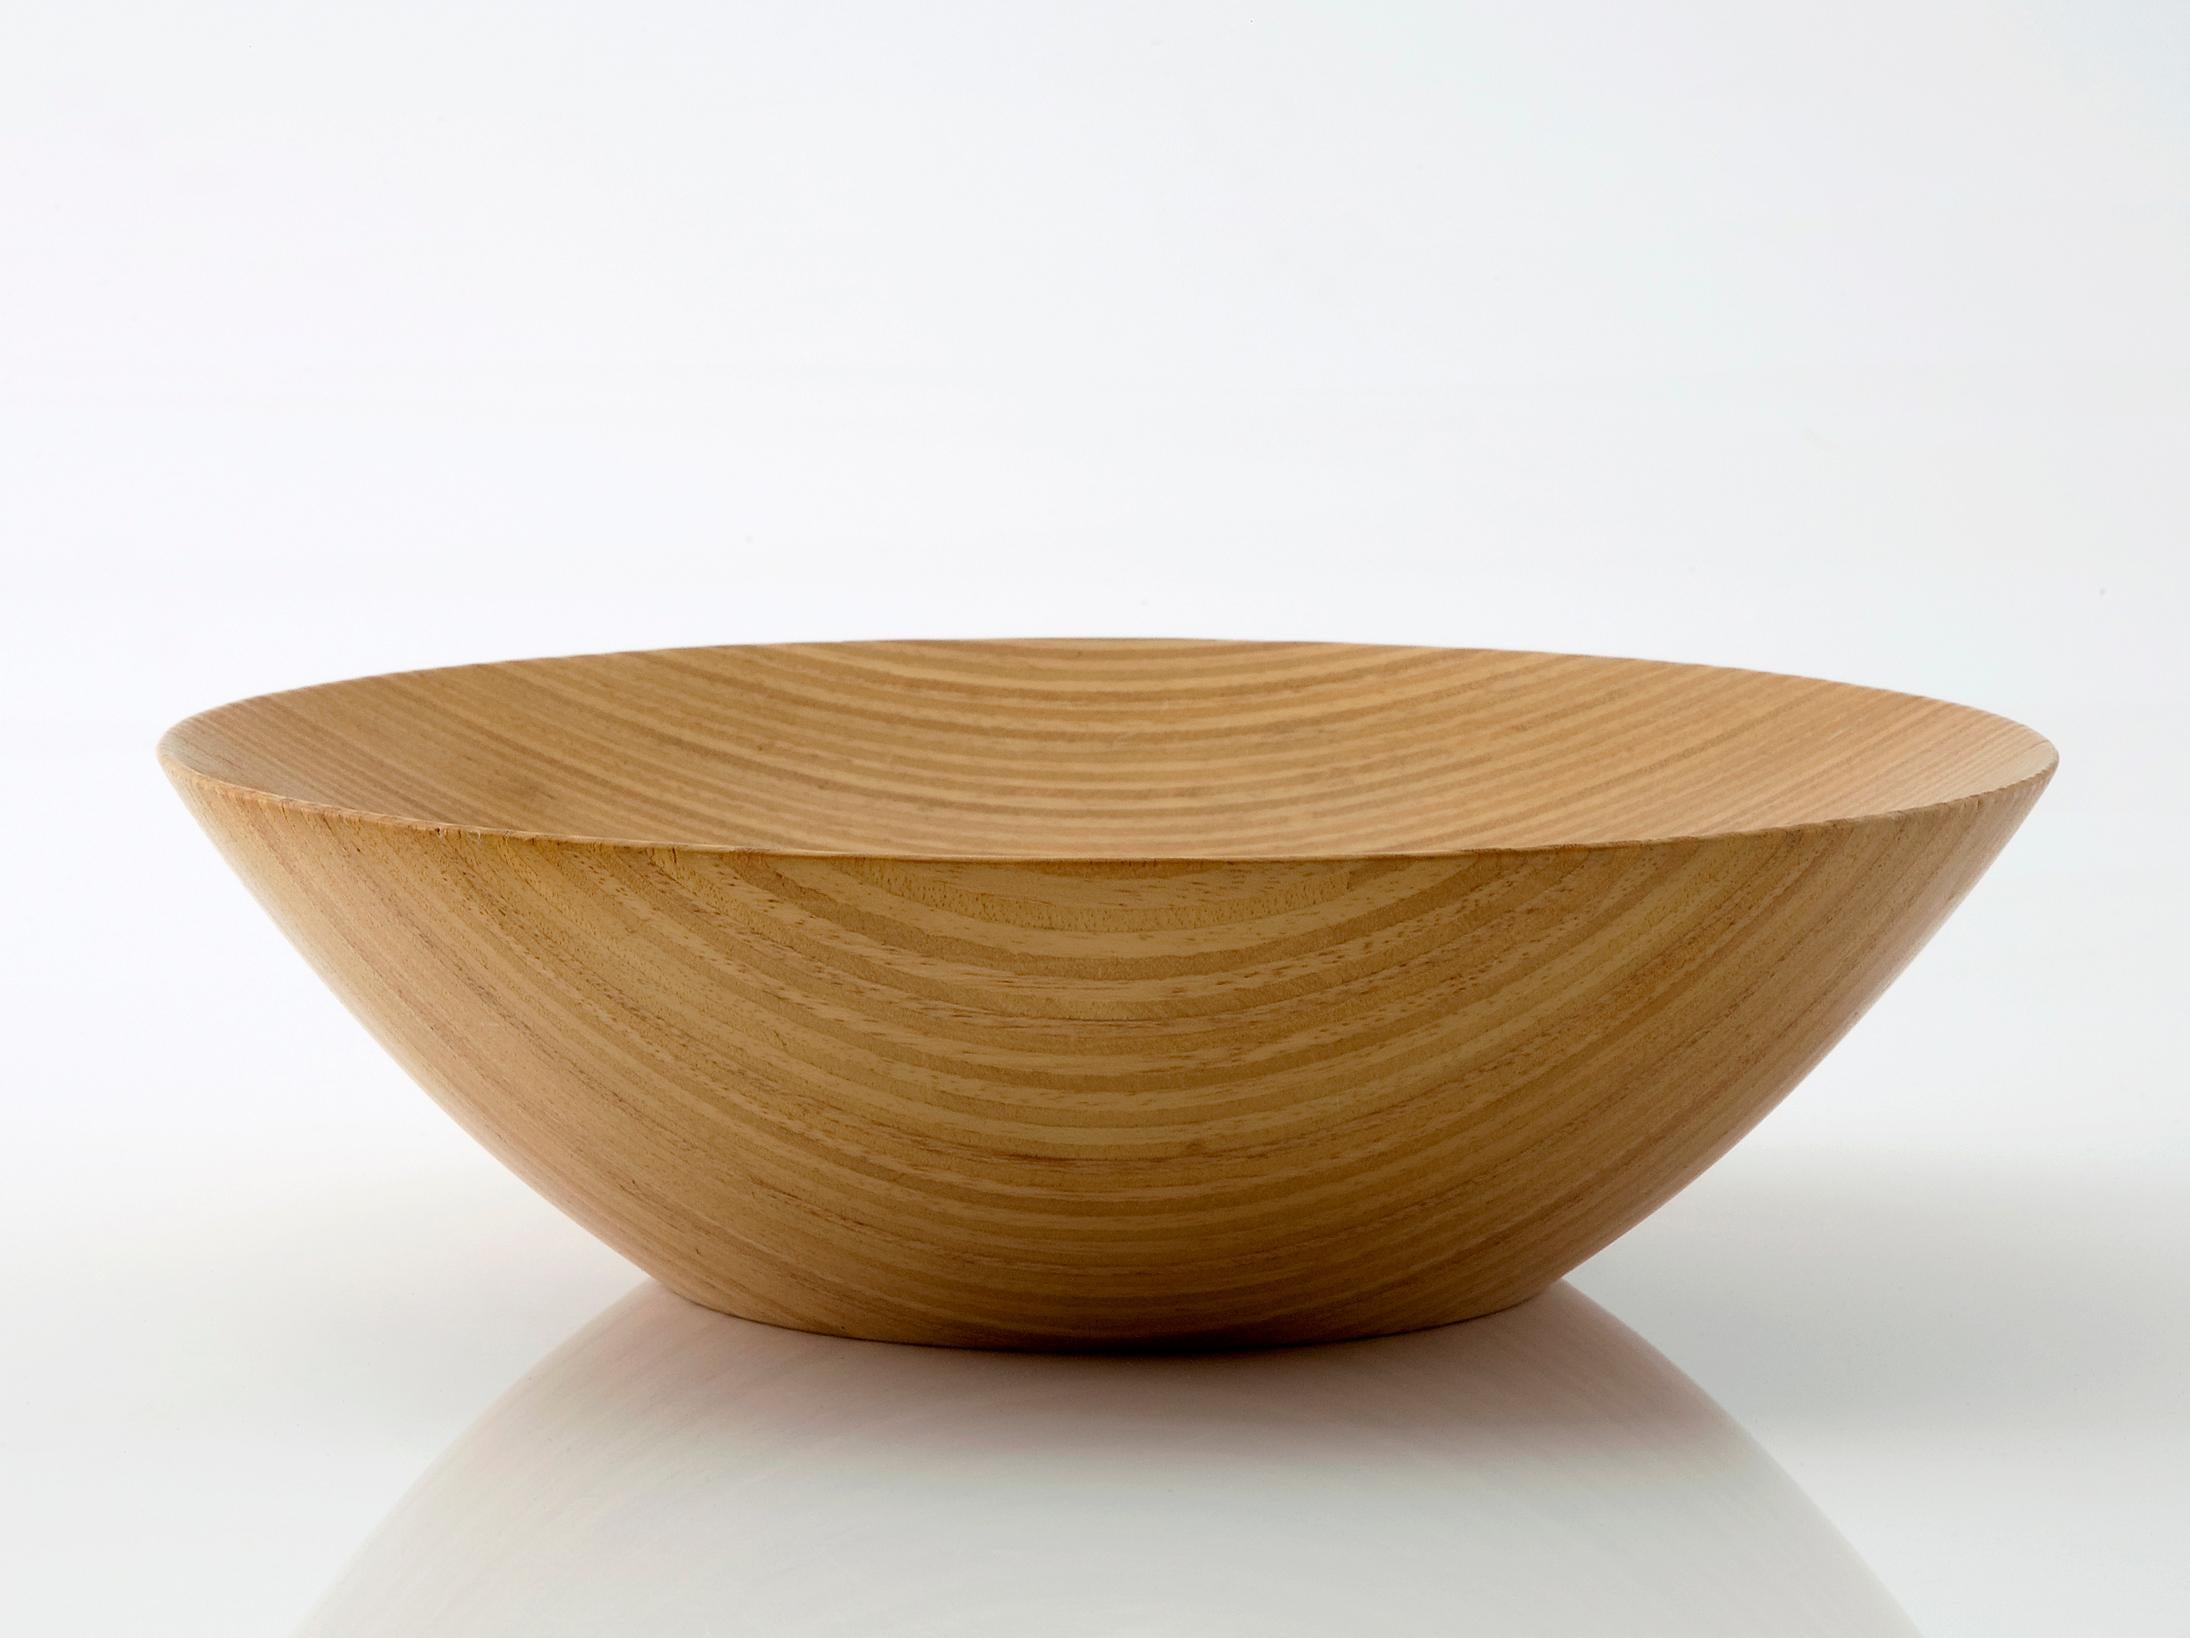 Inlaid bowl handcrafted in stack-laminated Brazilian hardwood. Designed and made by Julia Krantz, Sao Paulo, Brazil, 2007.
 